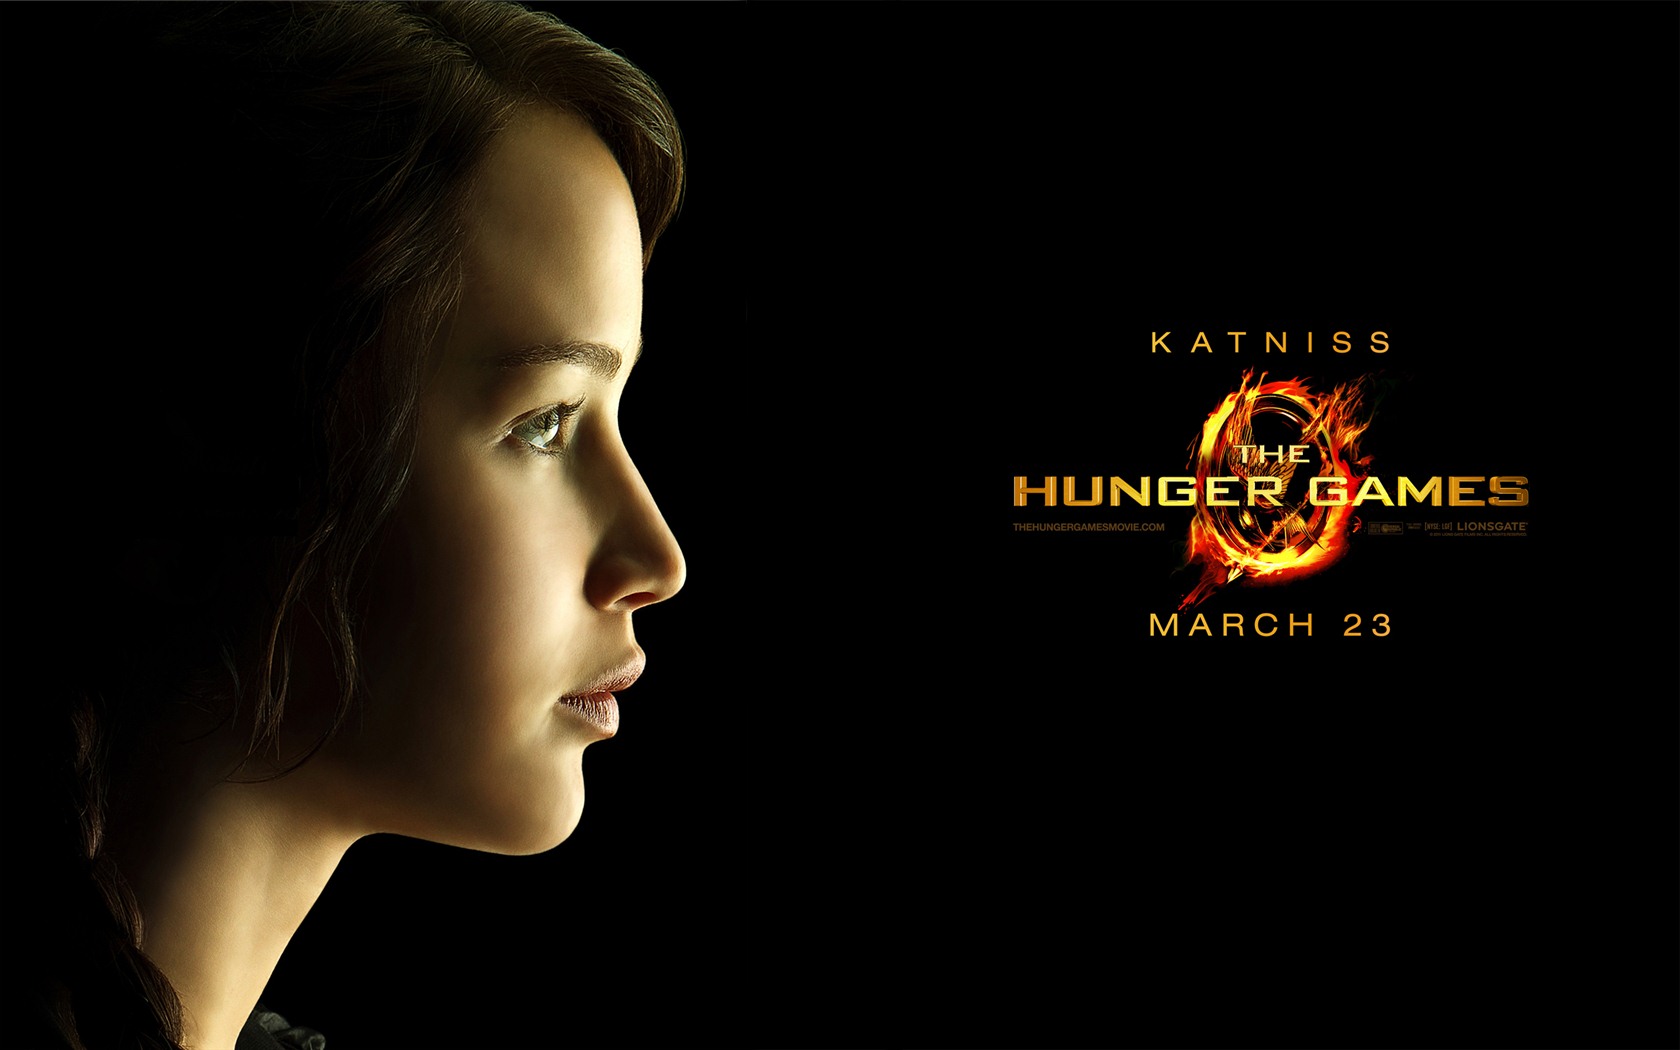 The Hunger Games HD wallpapers #14 - 1680x1050